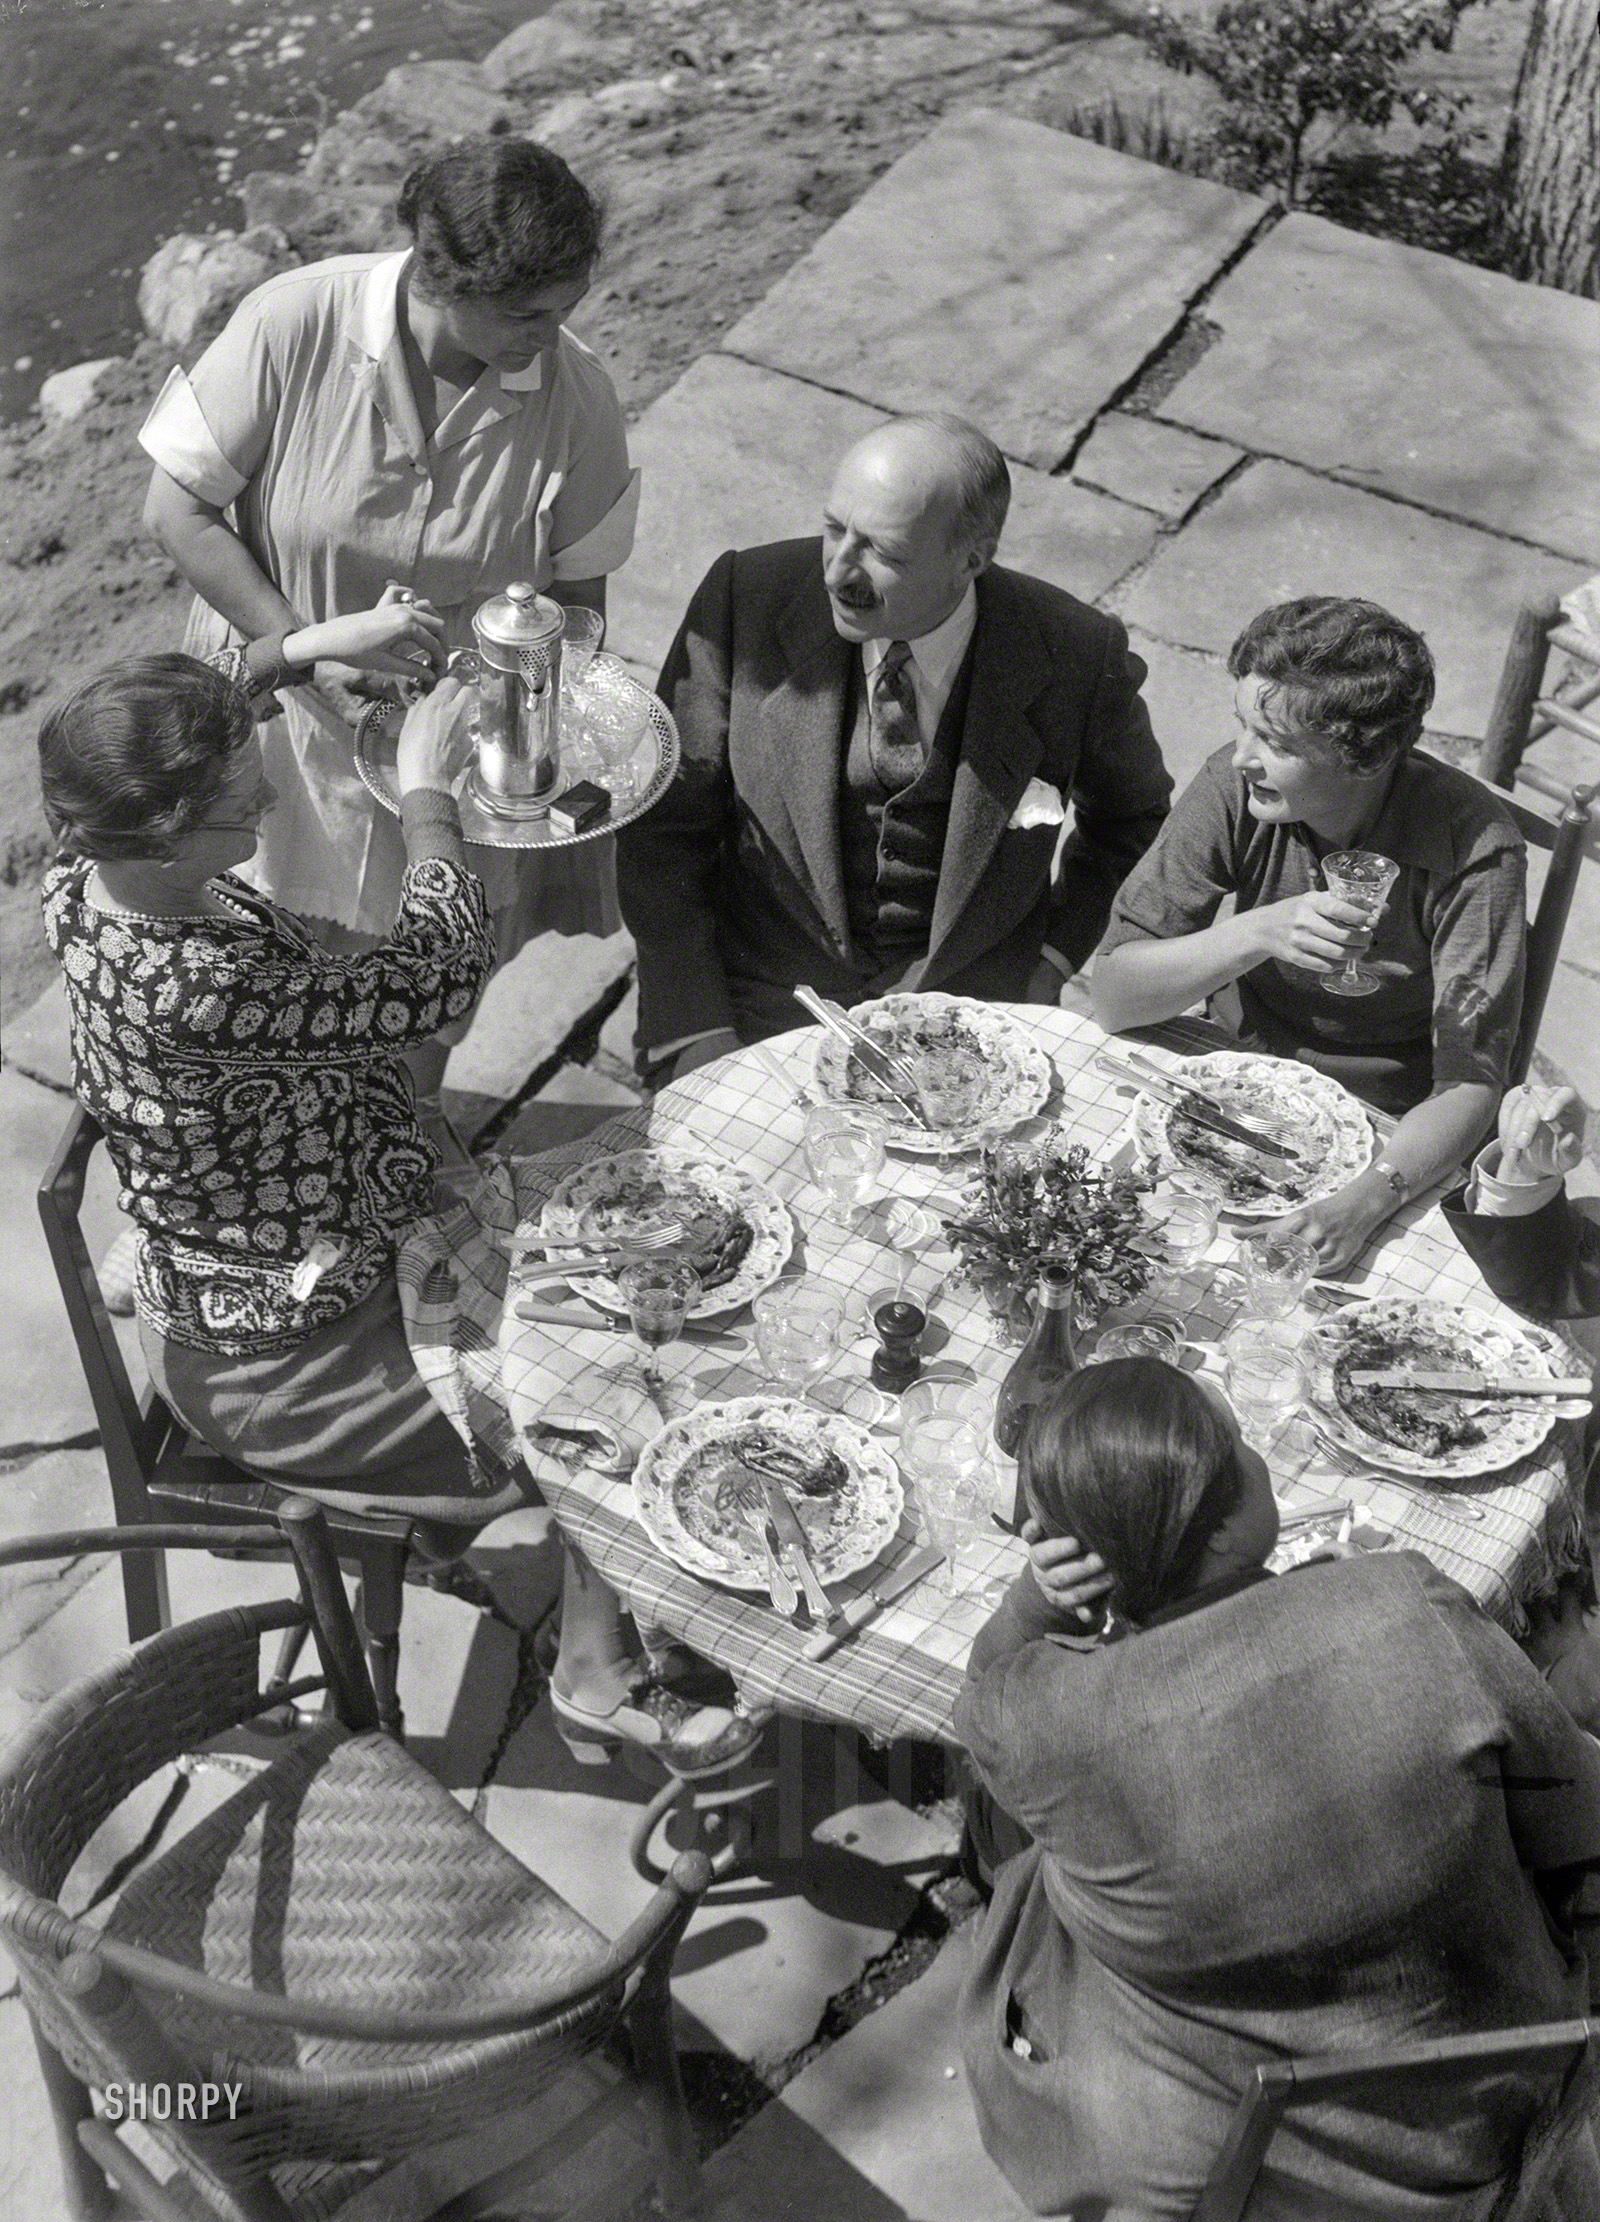 1933. "Mrs. Mary Benson and guests." Depression? What Depression? 4x5 nitrate negative by New York society photographer Arnold Genthe. View full size.